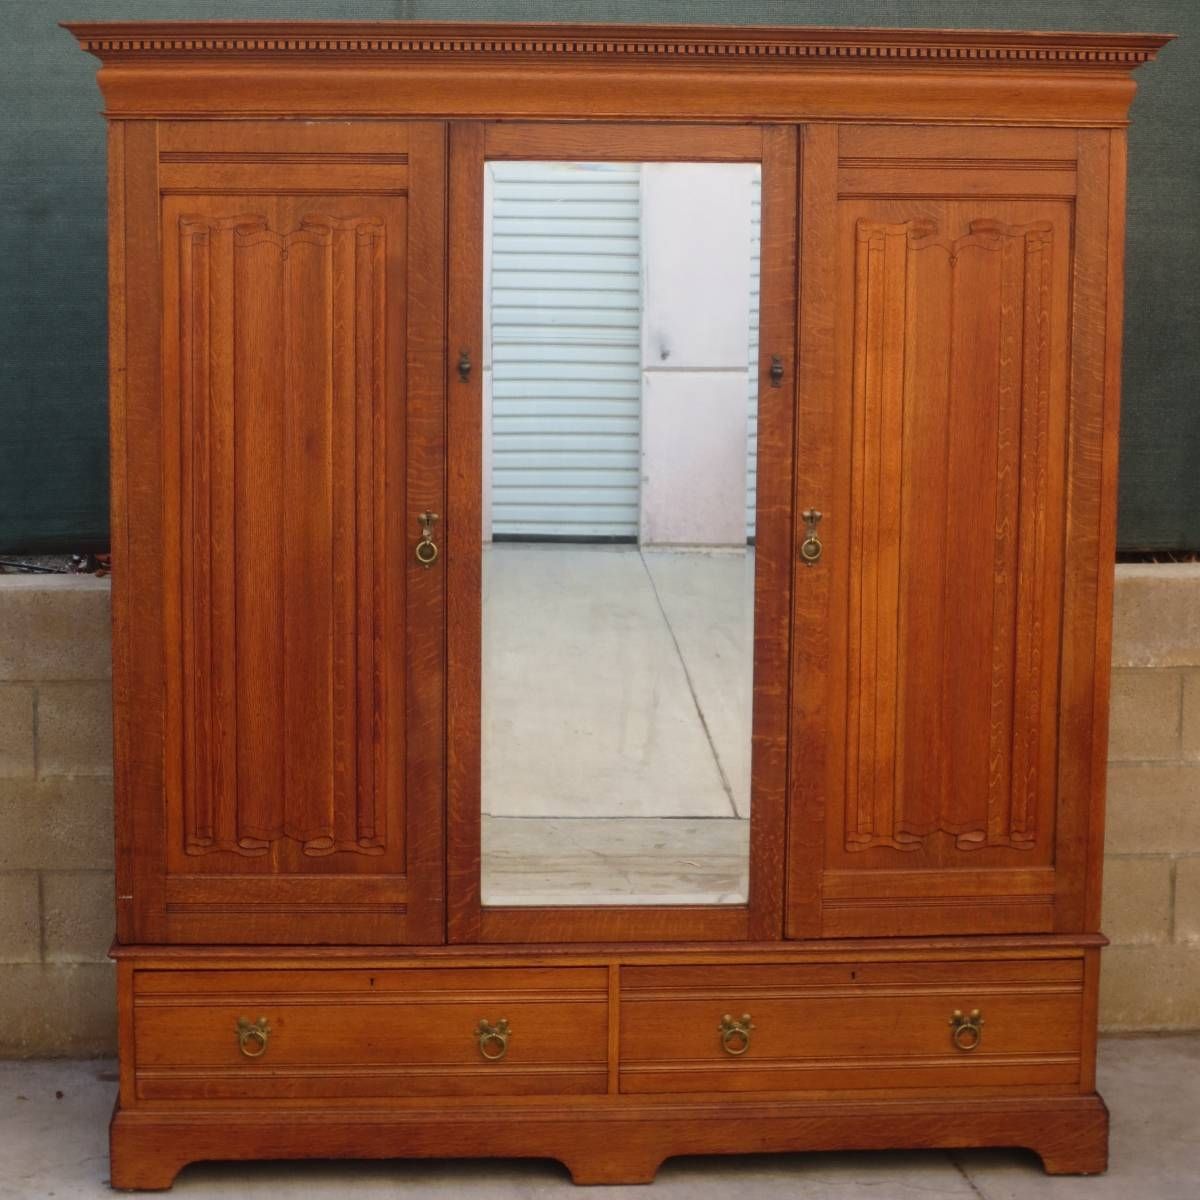 Antique Armoires, Antique Wardrobes, And Antique Furniture From For Antique Wardrobes (Photo 2 of 15)